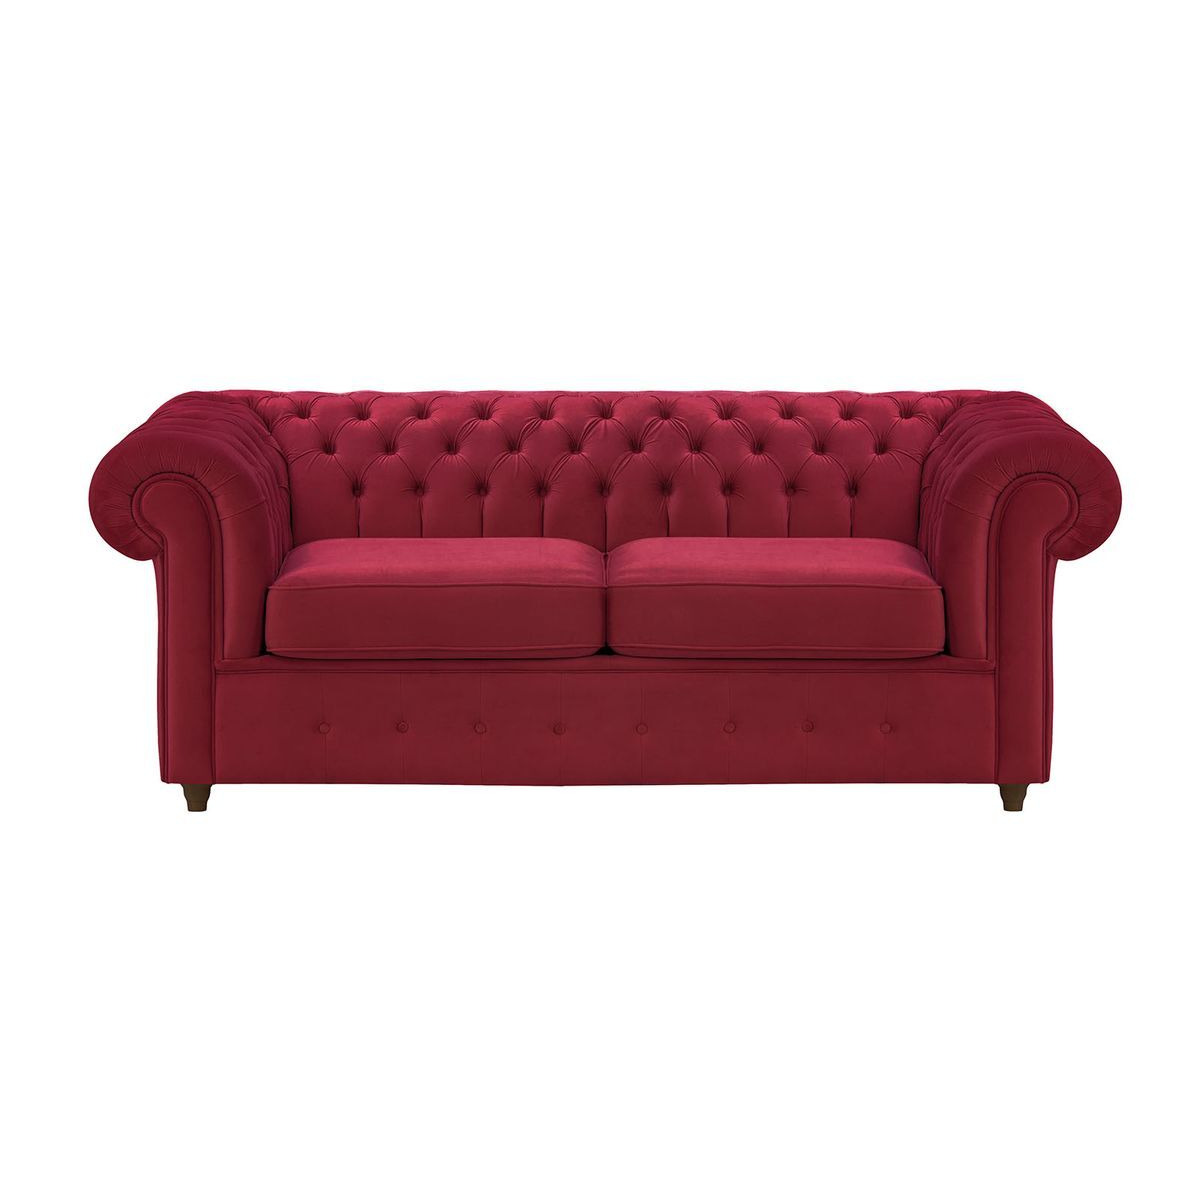 Chesterfield Max 2 Seater Sofa Bed, pink, Leg colour: dark oak - image 1